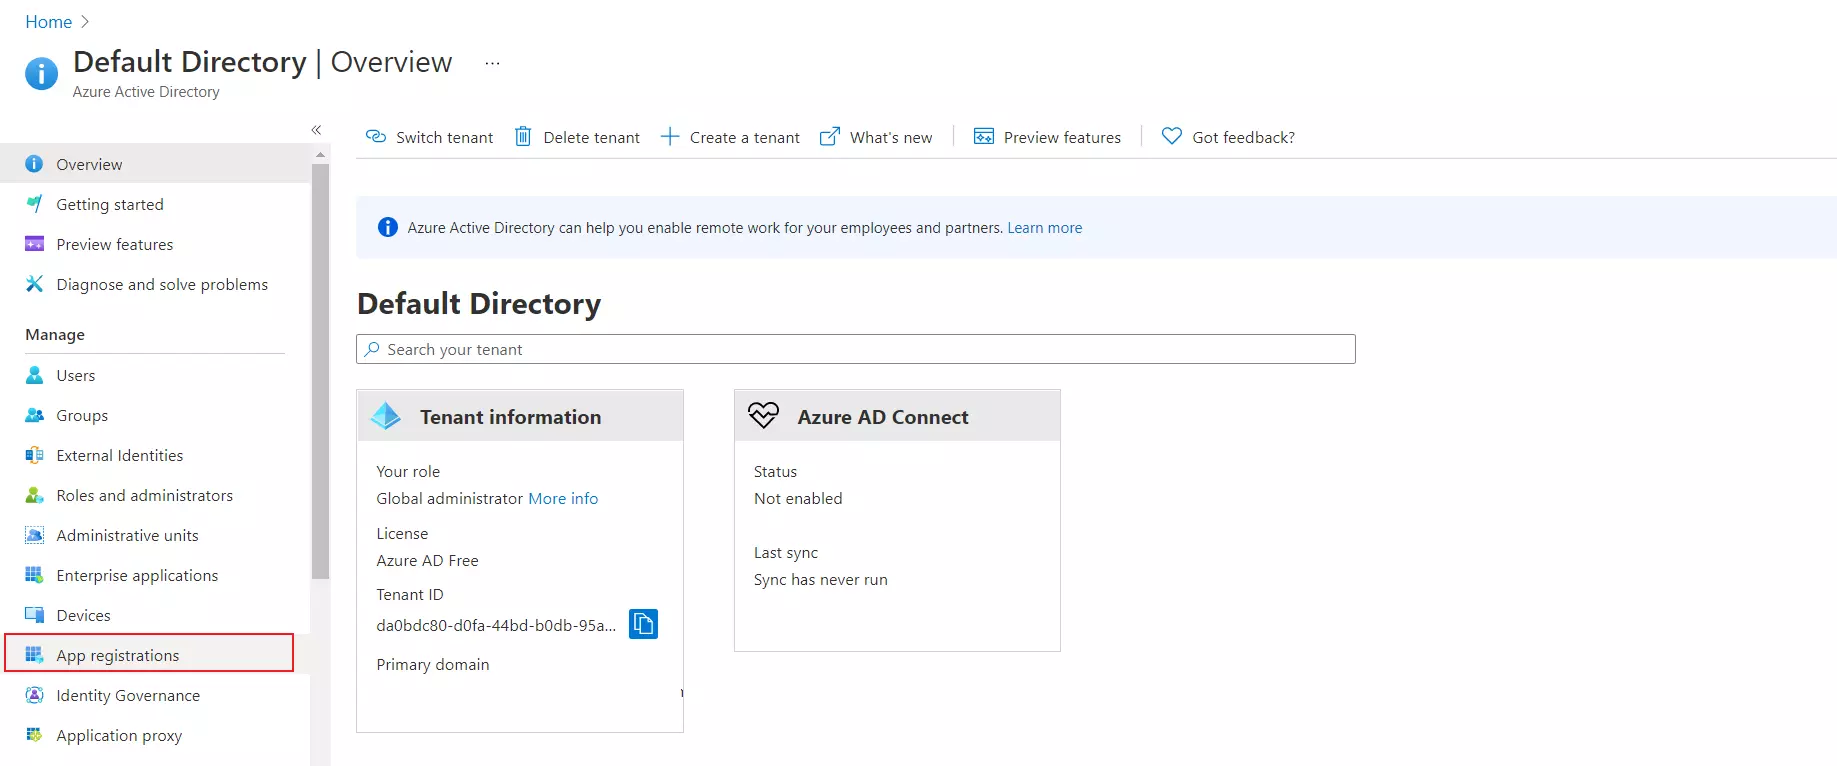 nopCommerce Single Sign-On (SSO) using Azure AD as IDP - New registrations